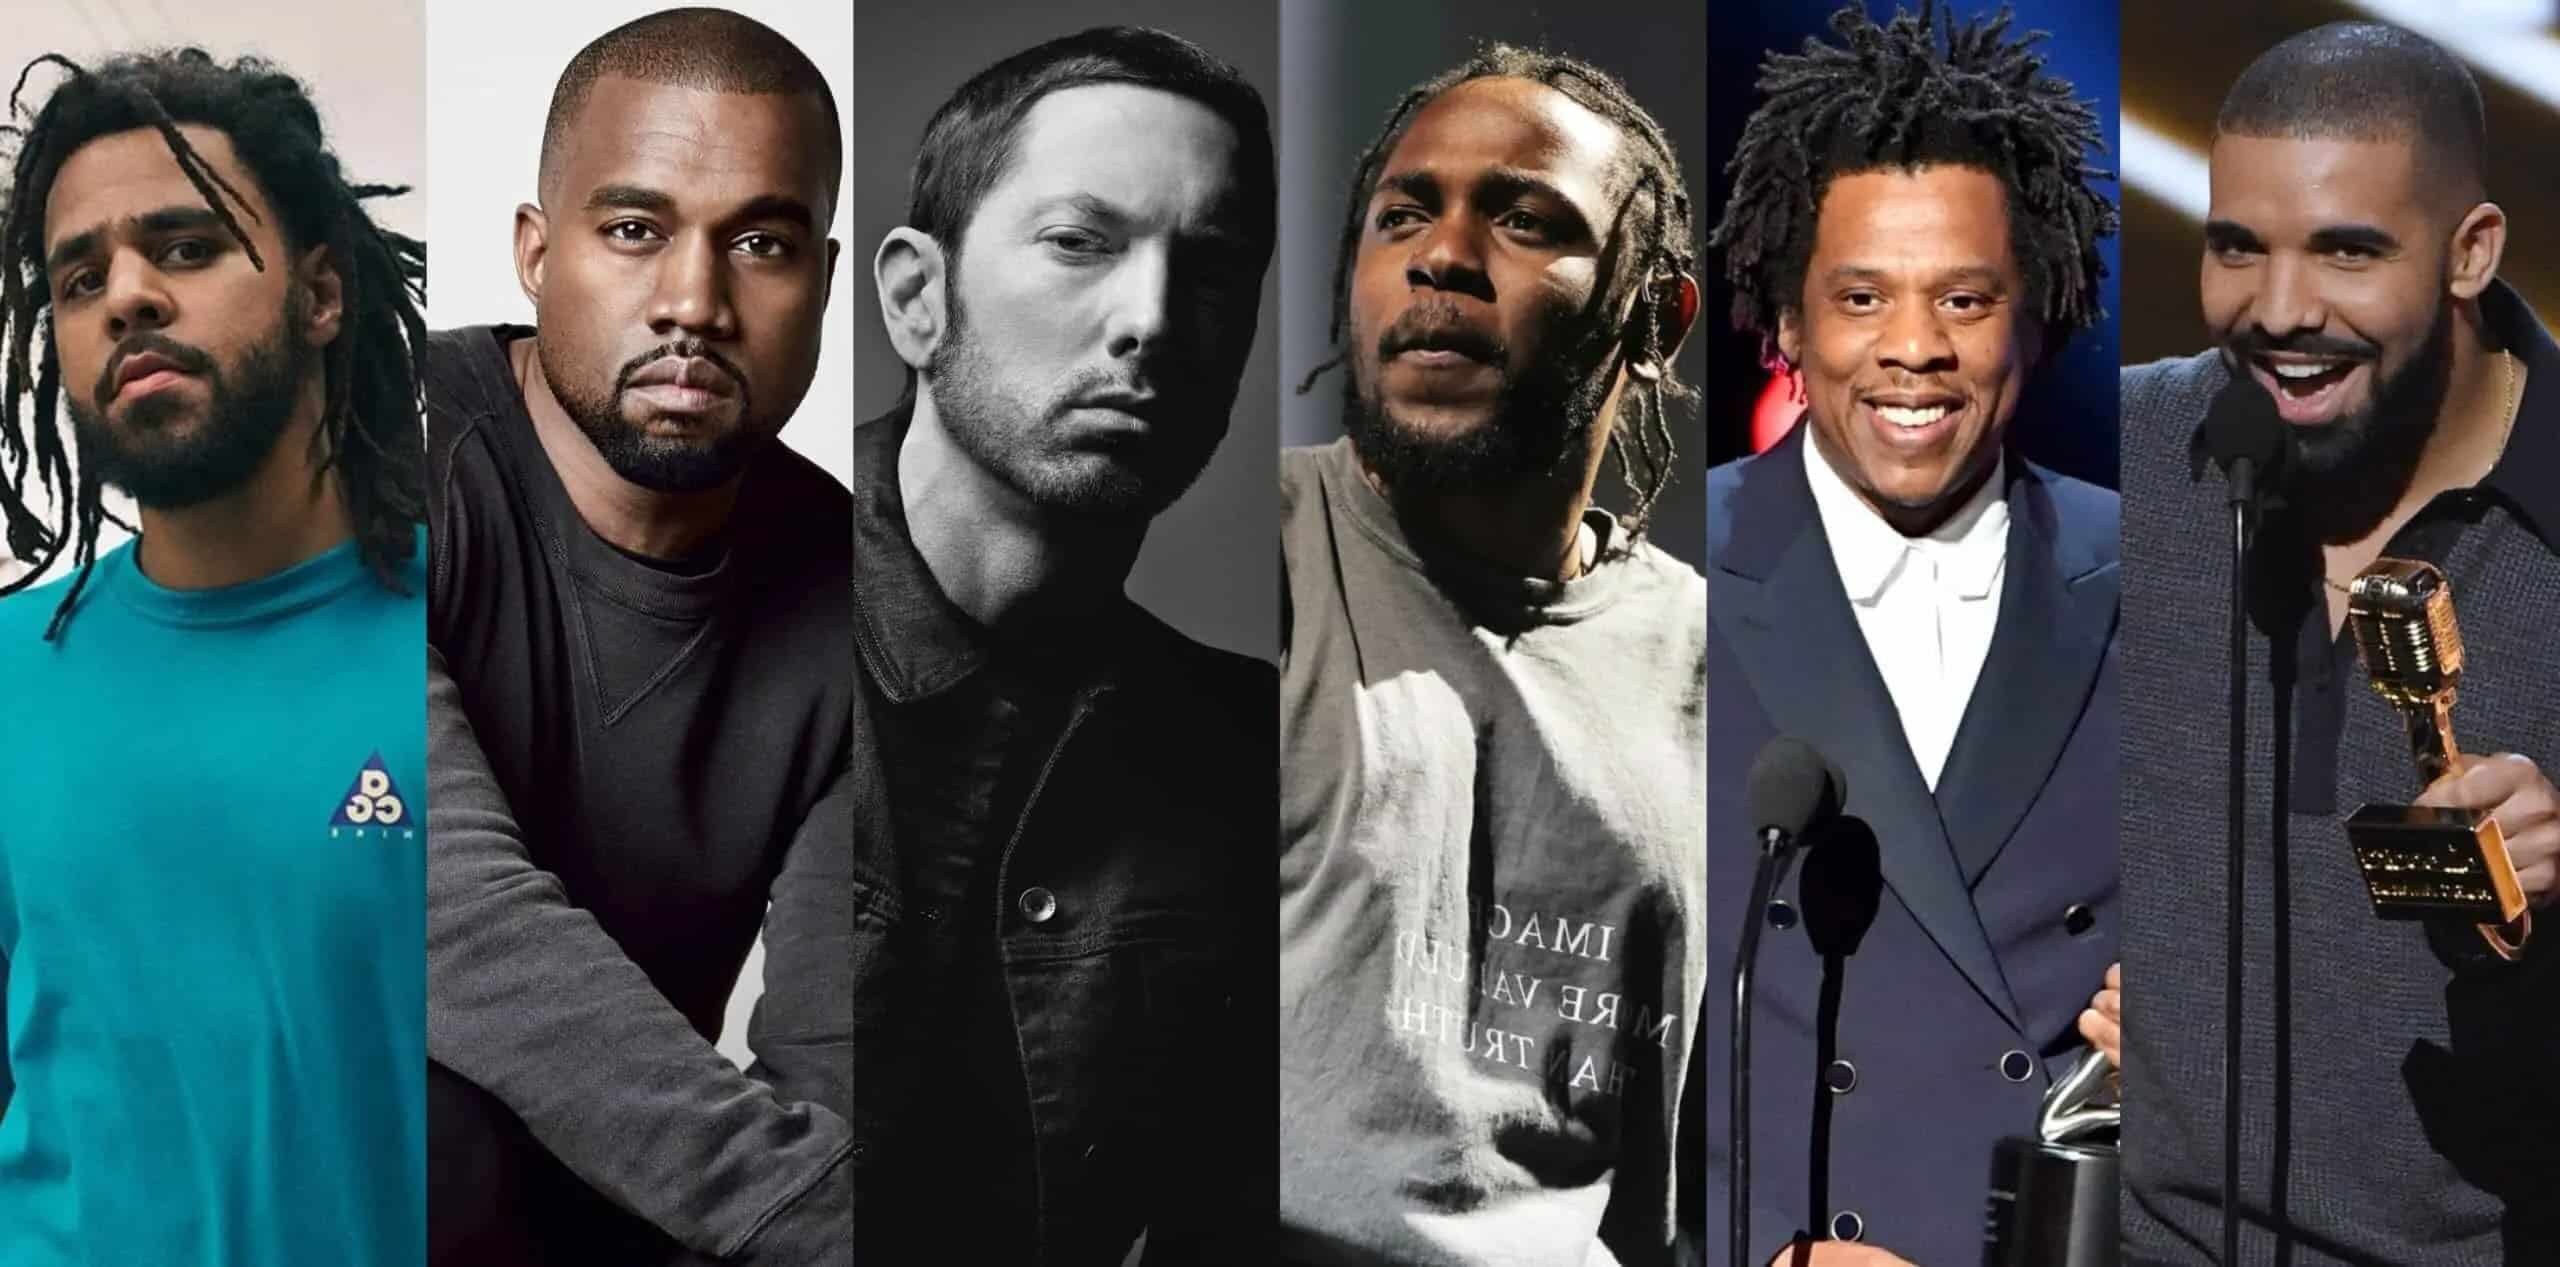 Best Rappers ever